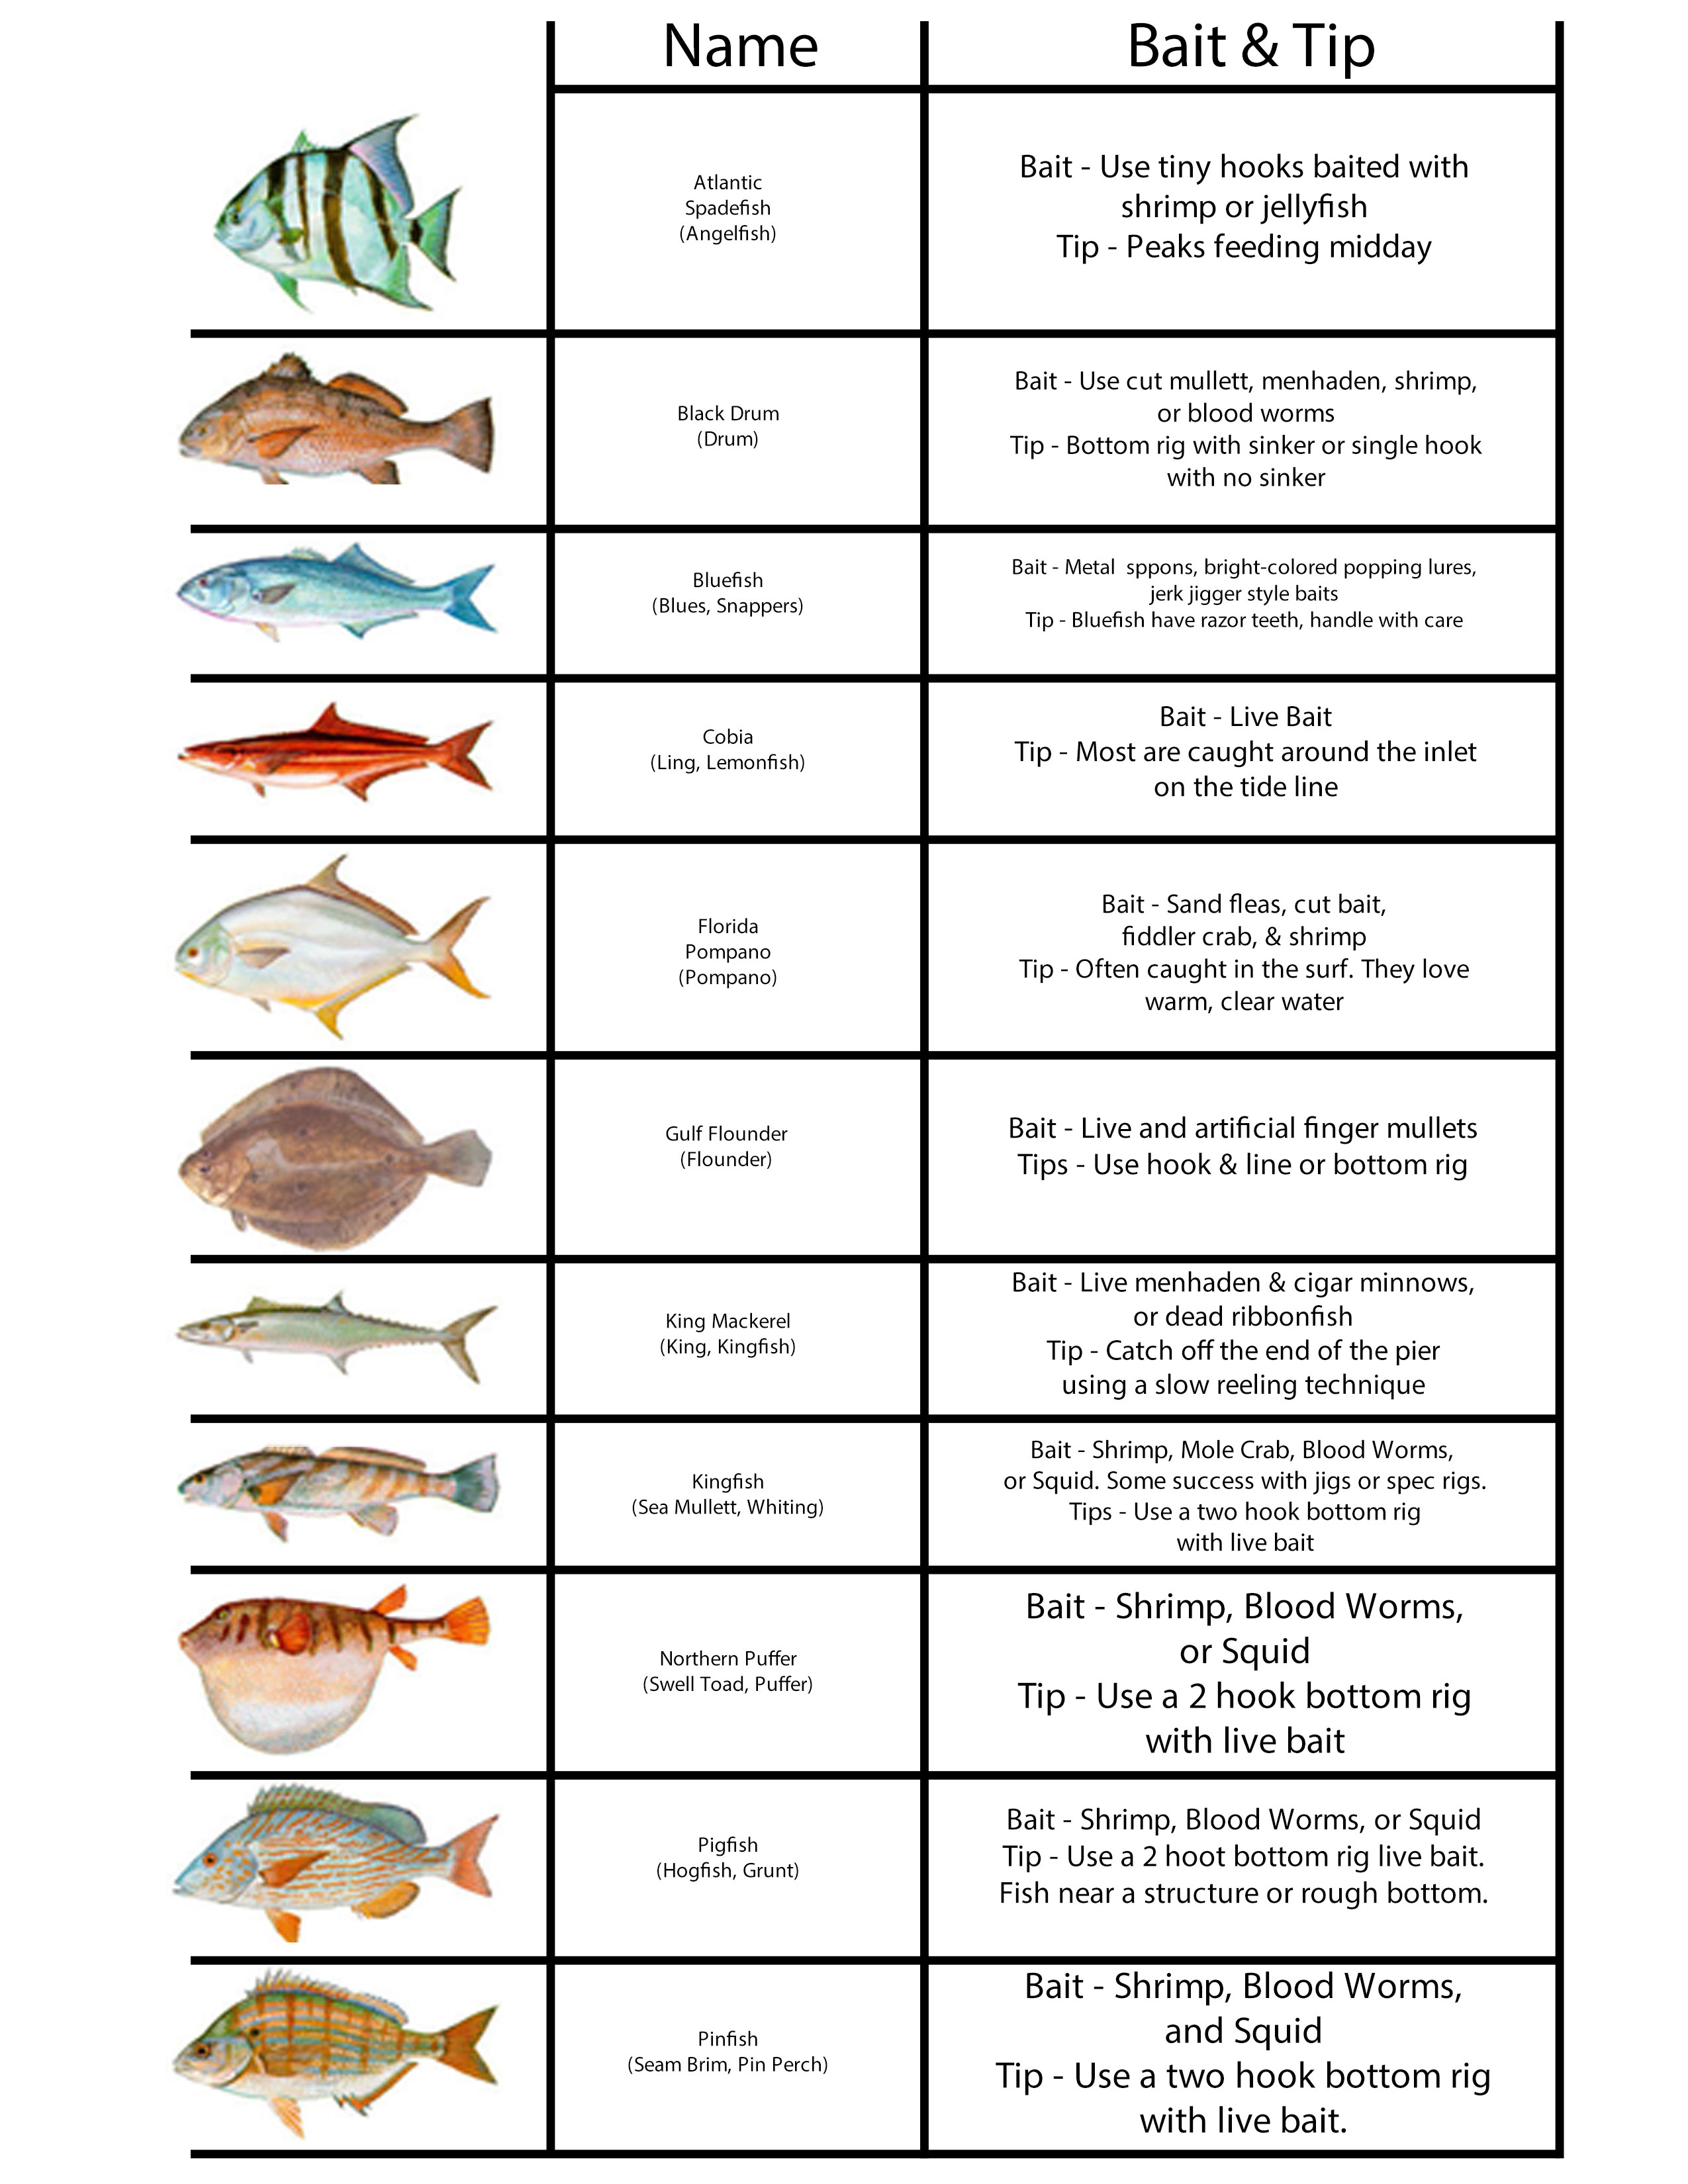 https://www.southernshores.com/images/pages/fishing/fishing-baits-tips-1.jpg